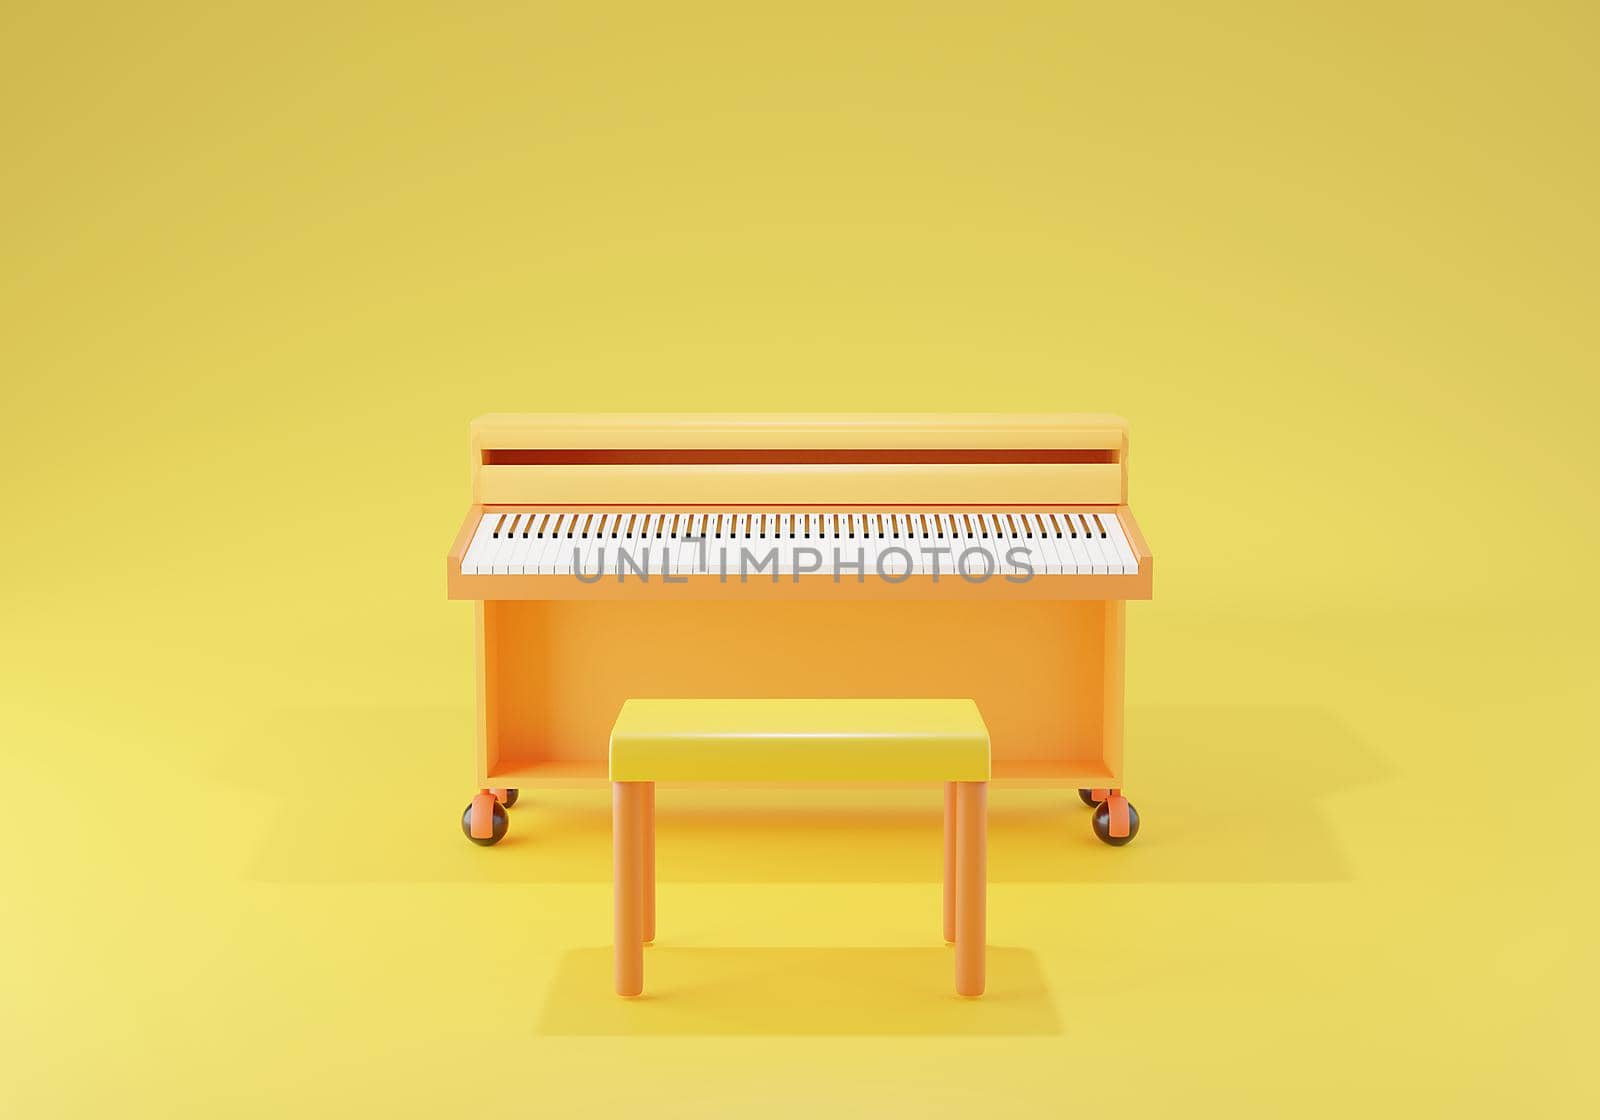 The 3D rendering piano colorful with a yellow chair on the yellow background, Live music play concert concept